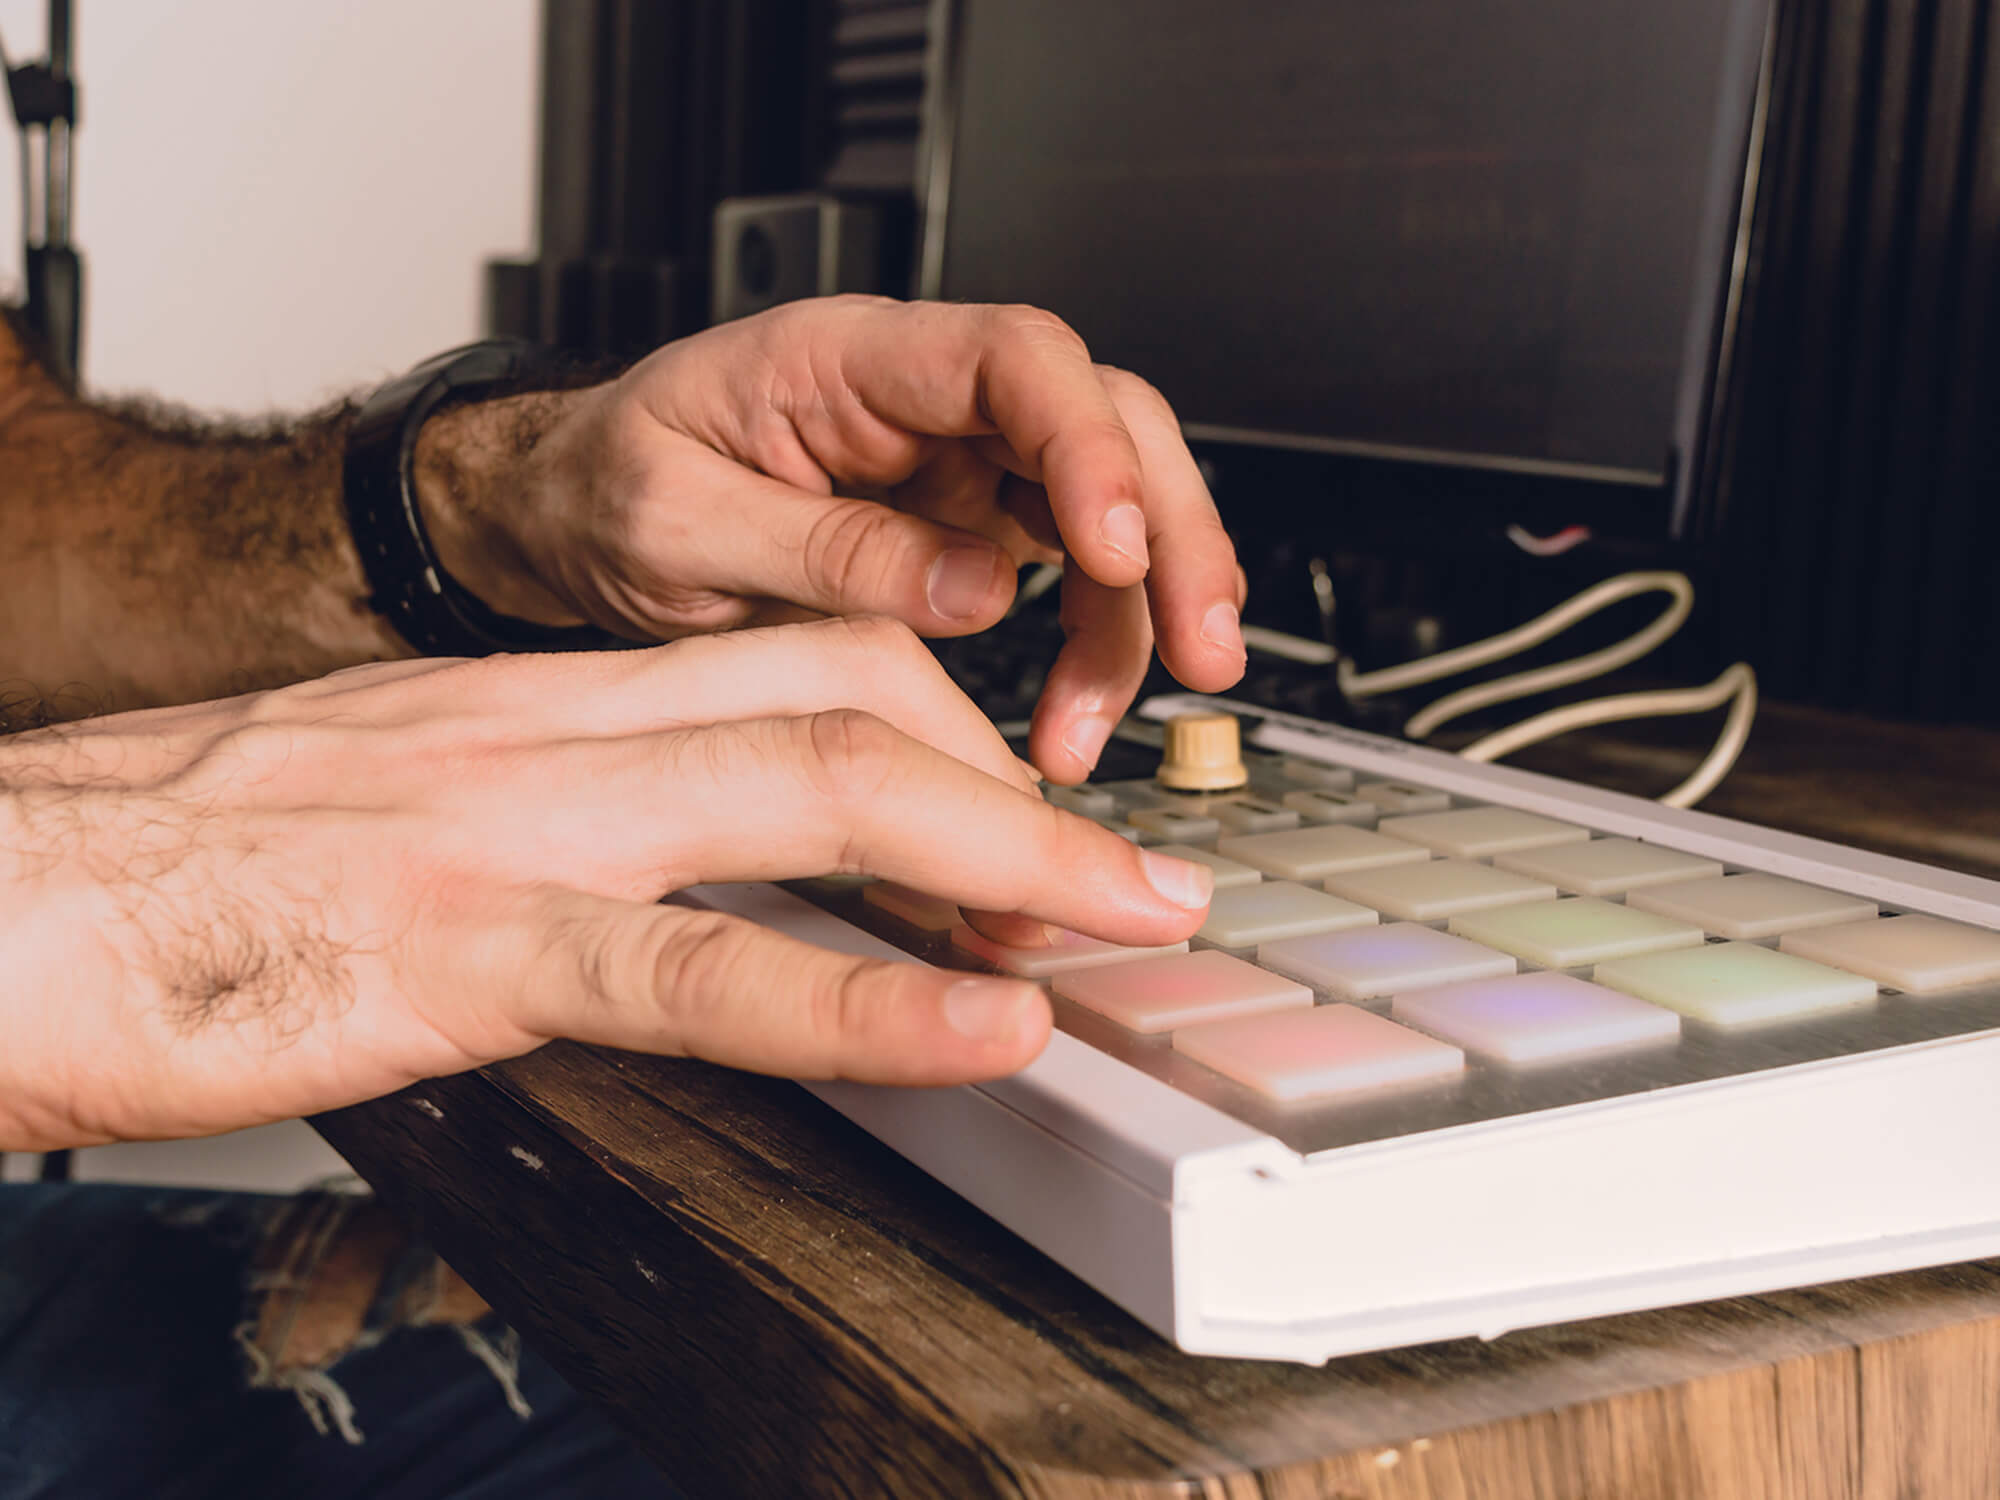 Hands on a MIDI controller in a home studio, photo by Jose Contreras/Getty Images